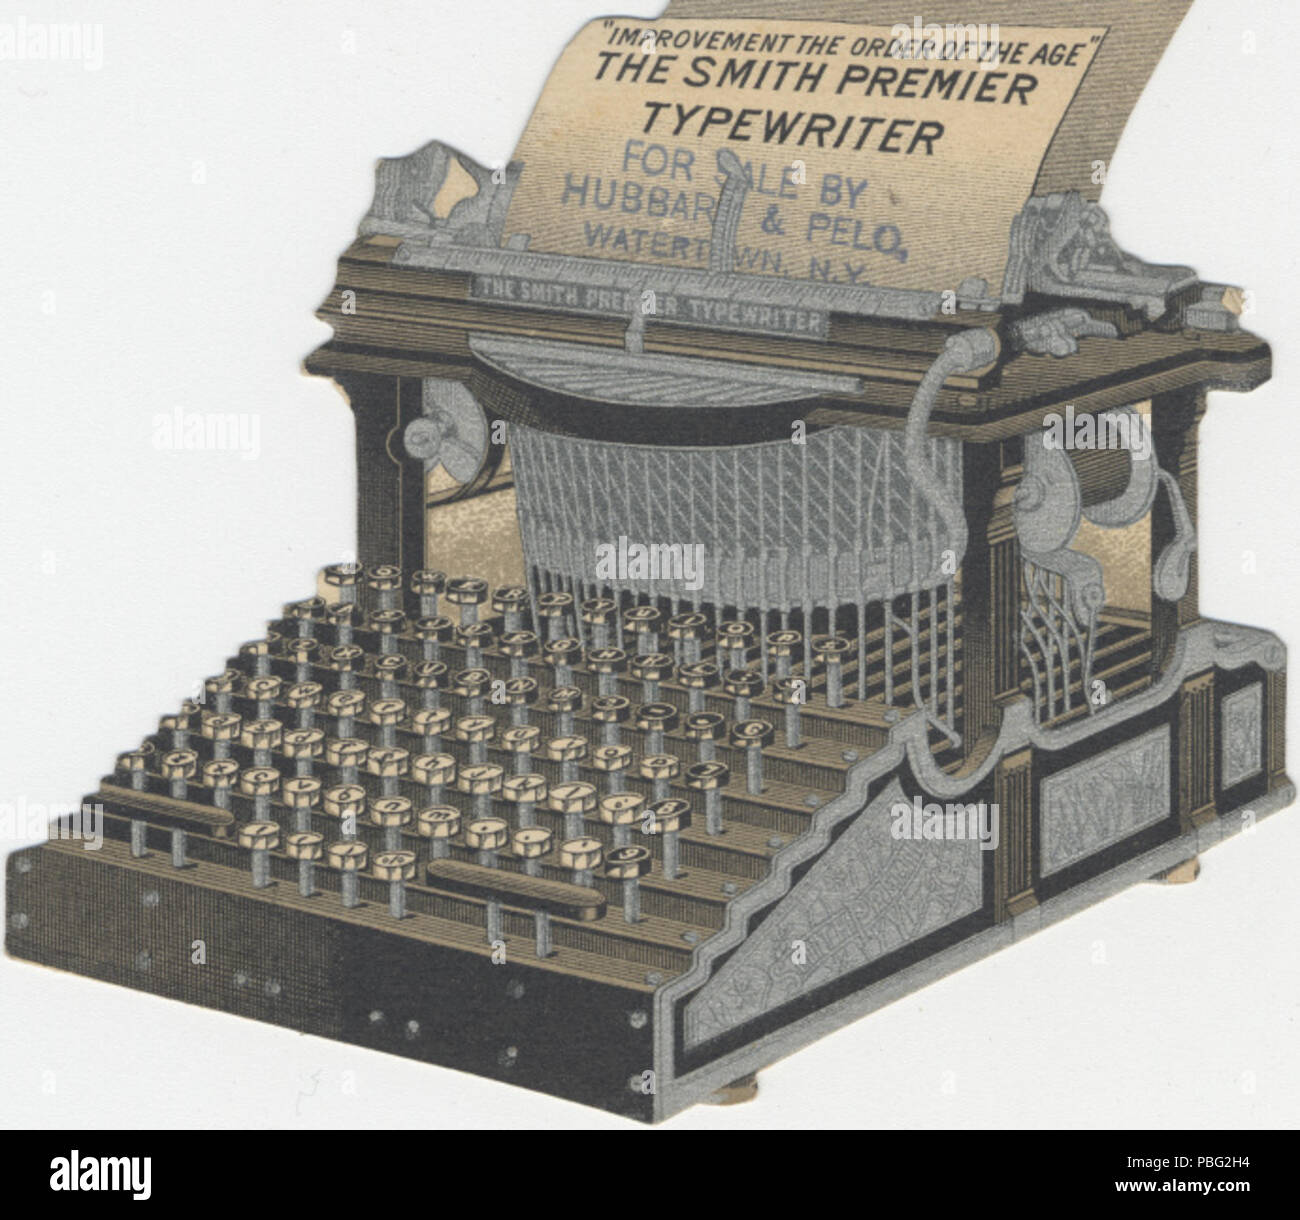 Making a Comeback? 11 Facts on the History of Typewriters - ,  a division of Monroe Systems for Business